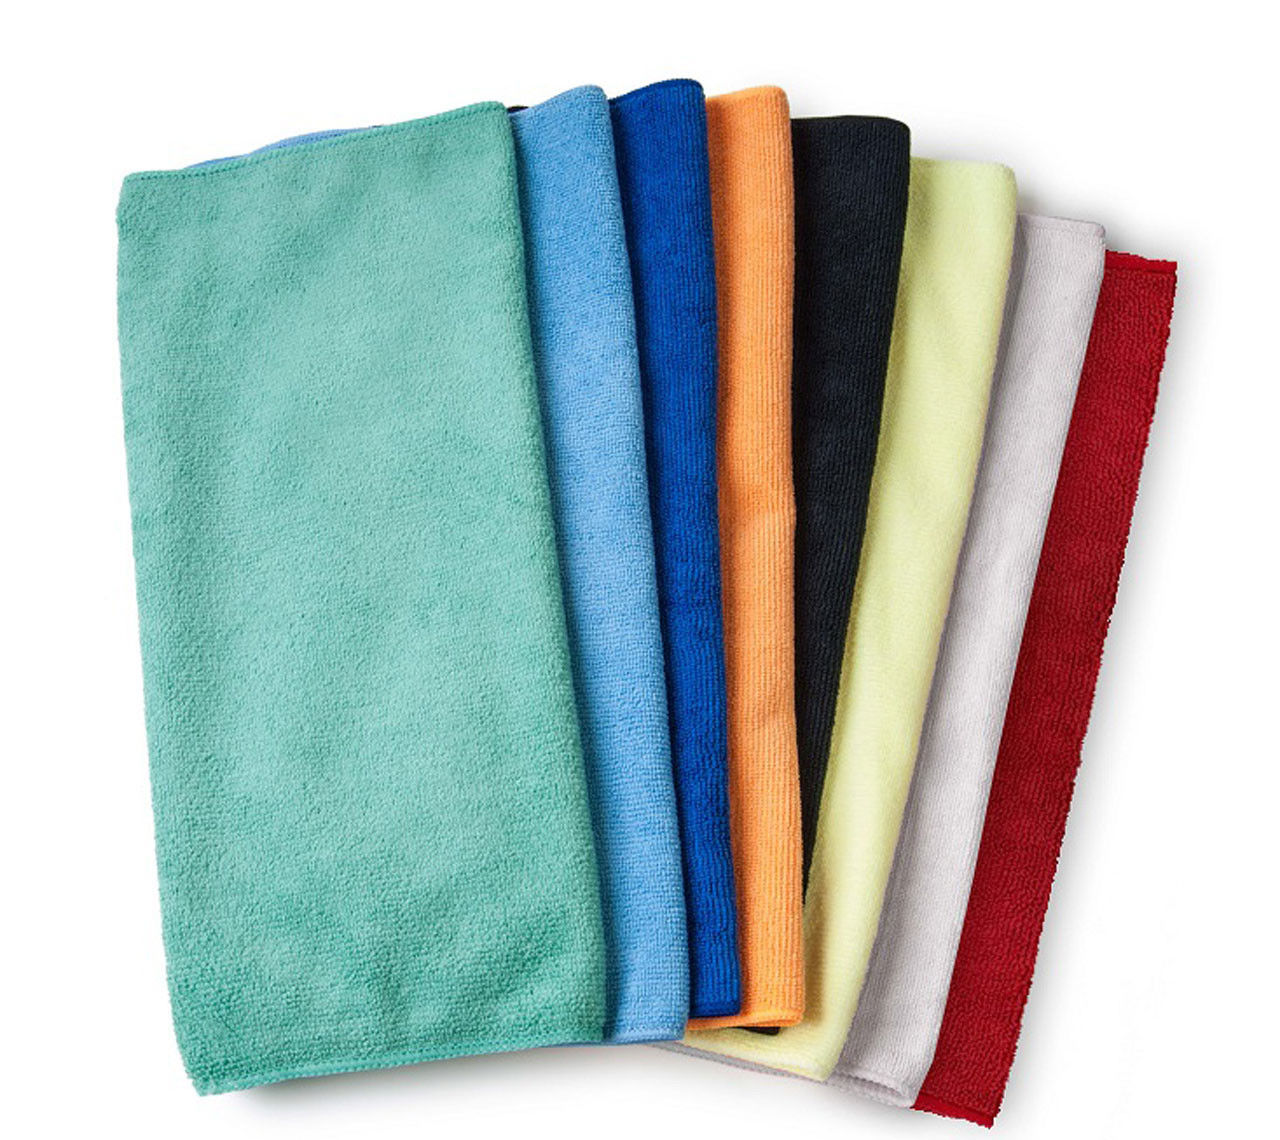 Are 300gsm microfiber towels safe for all surfaces?